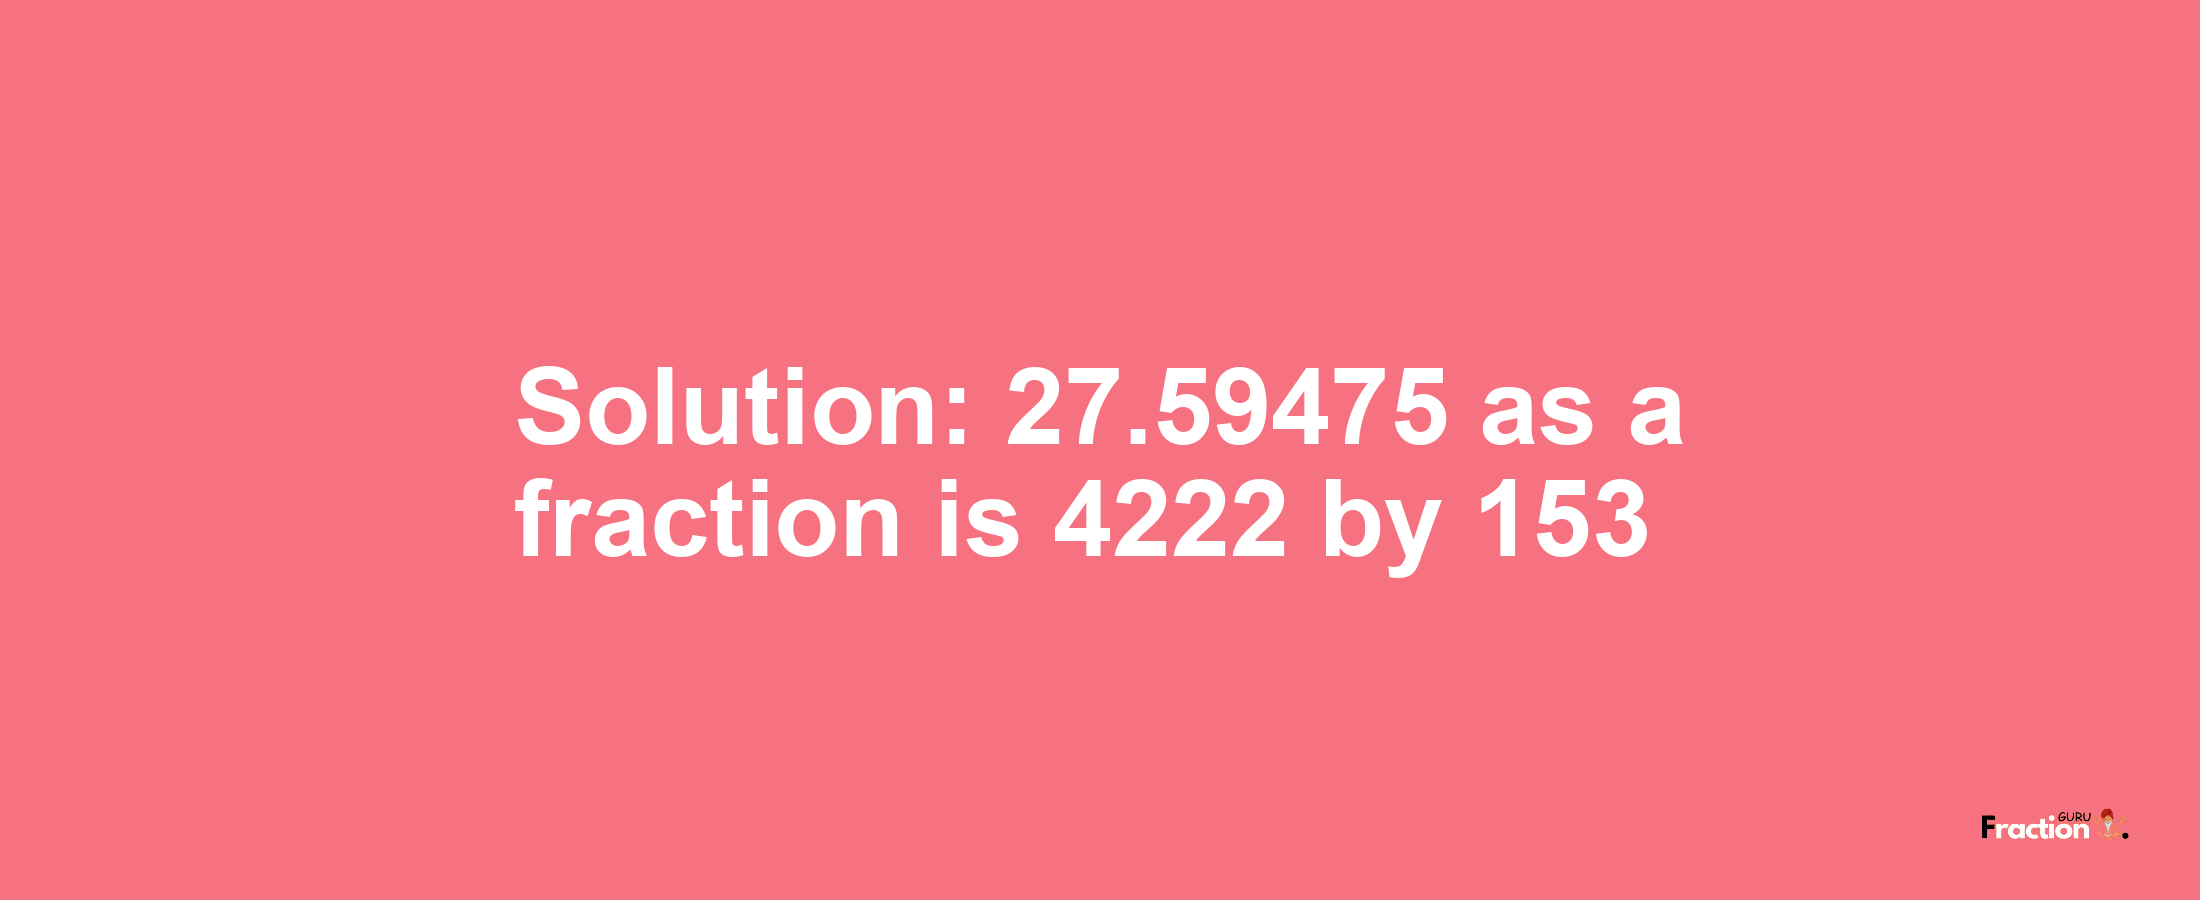 Solution:27.59475 as a fraction is 4222/153